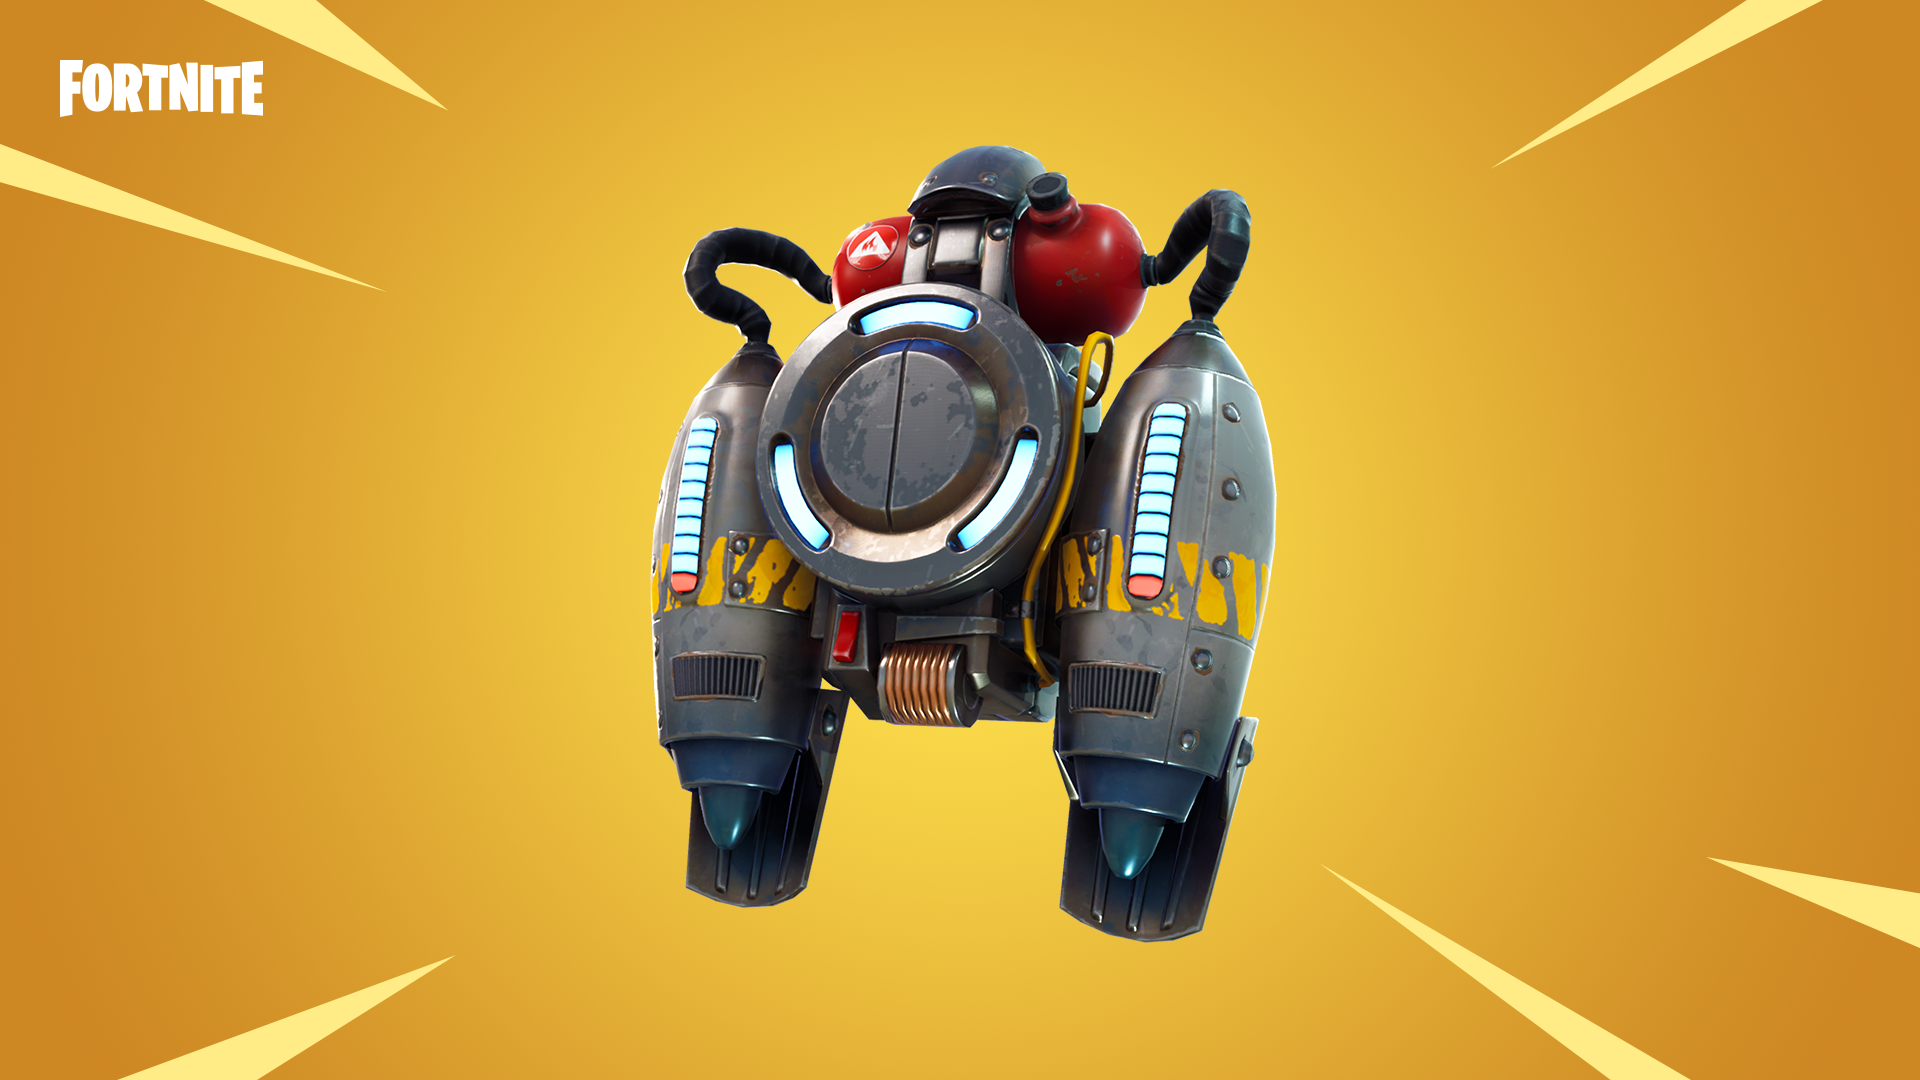 jetpack is back in fortnite with the return of close encounters - 701 patch notes fortnite